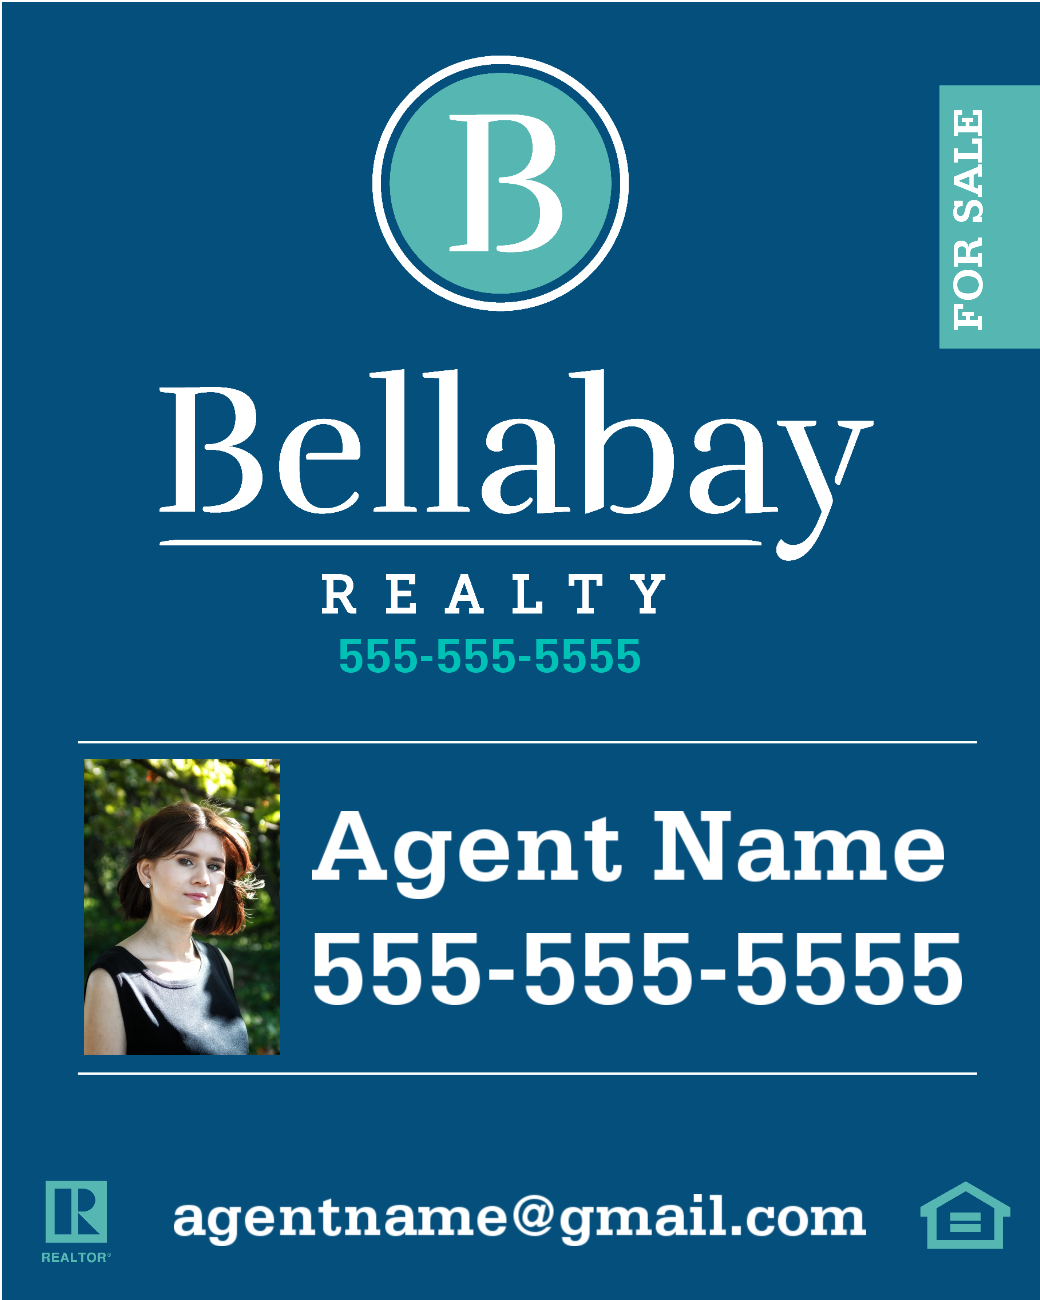 30 x 24 Real Estate Sign - with Photo